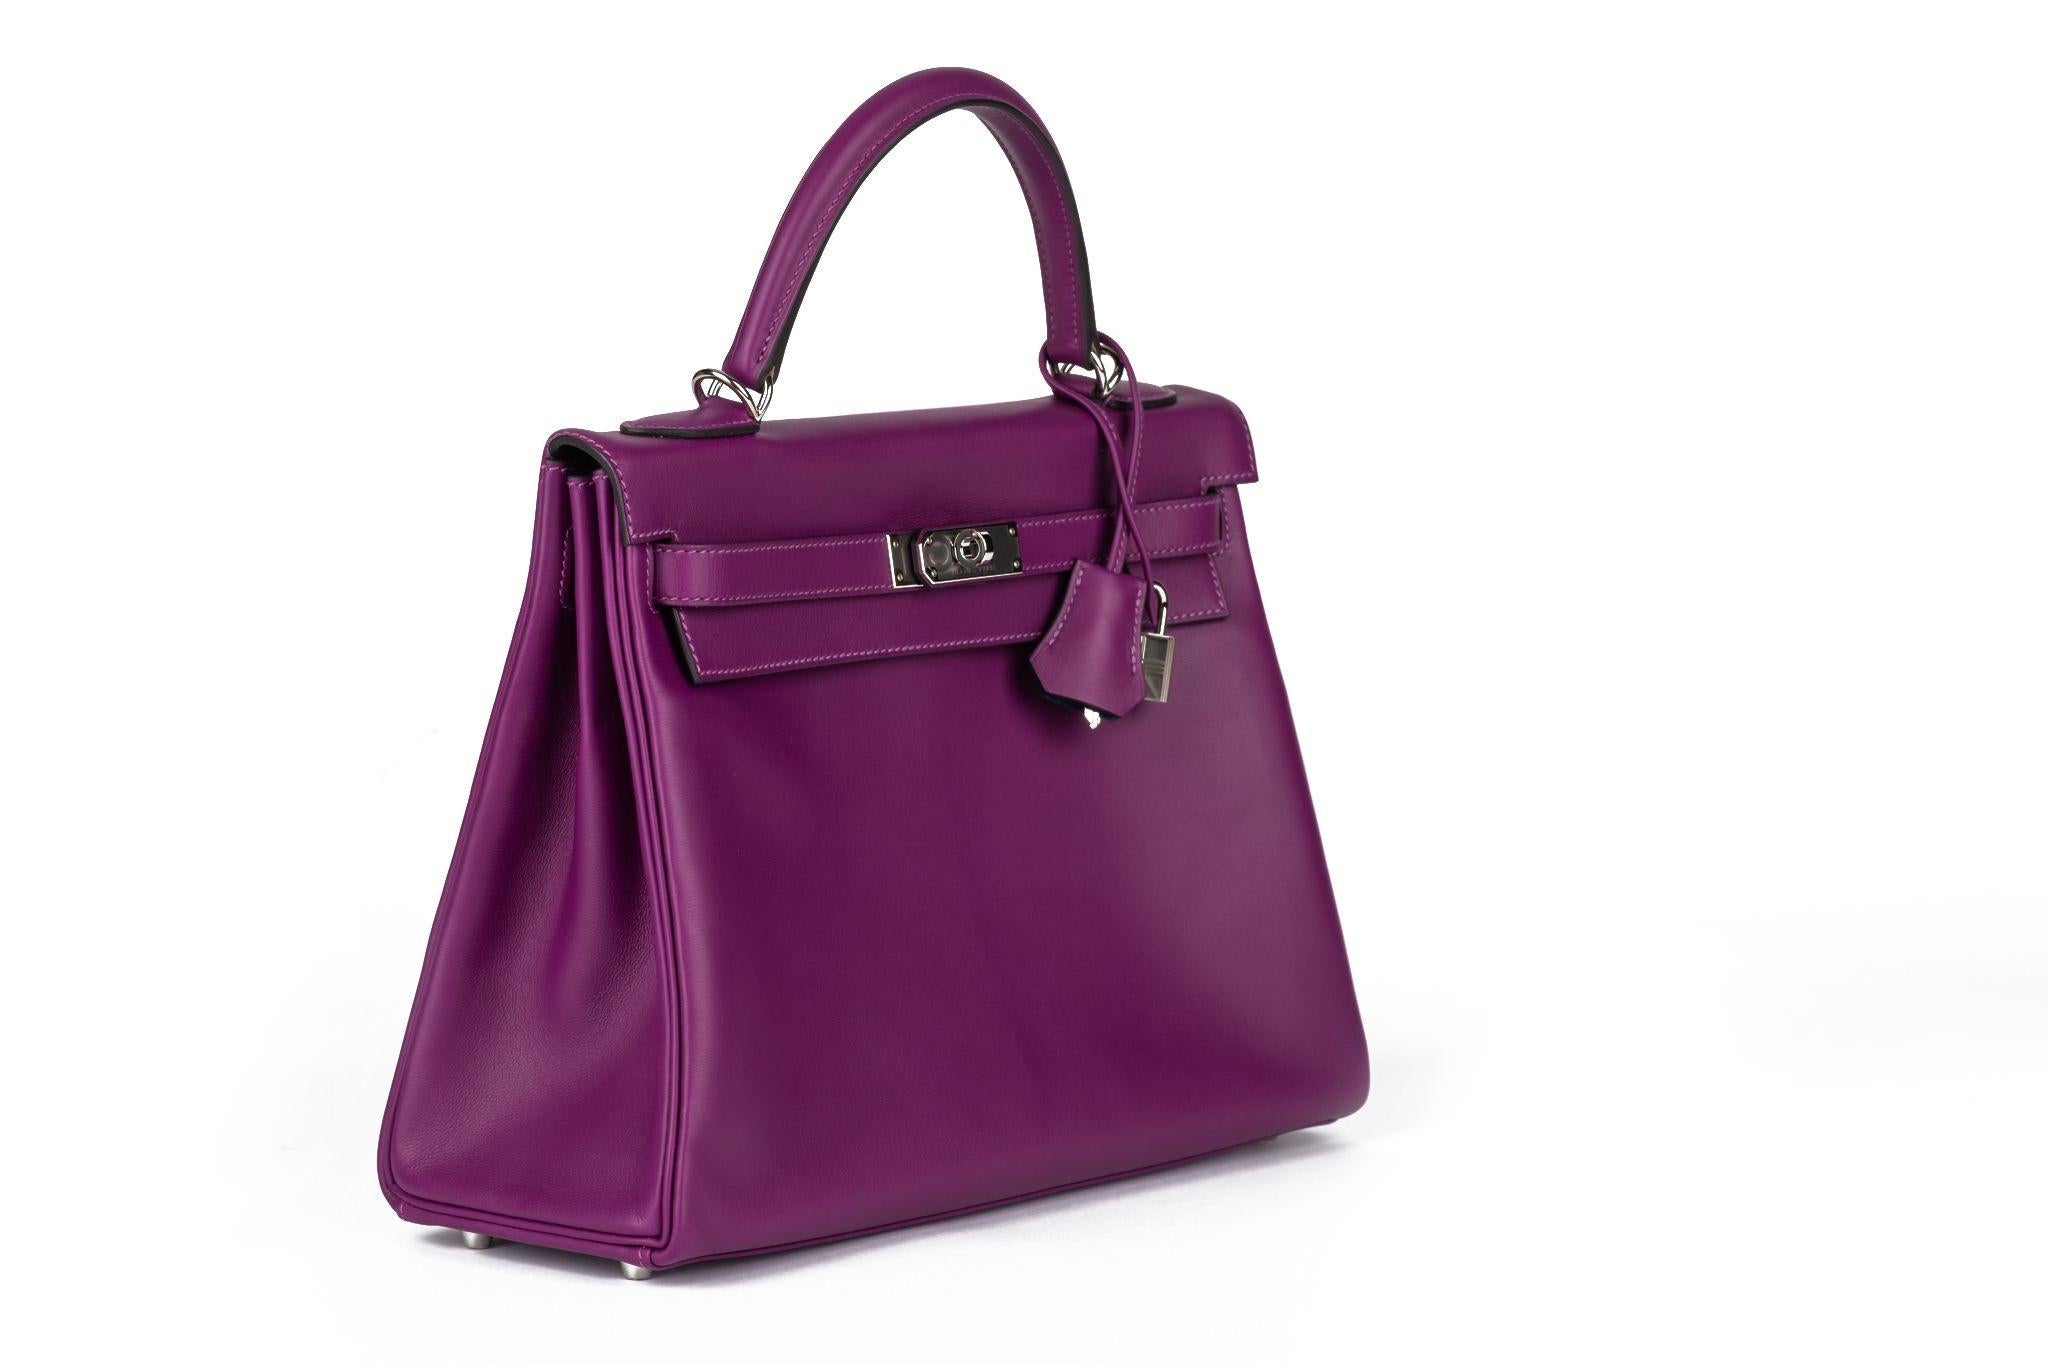 Hermès Kelly 32 Retourne Verso Anemone Thalassa In Excellent Condition For Sale In West Hollywood, CA